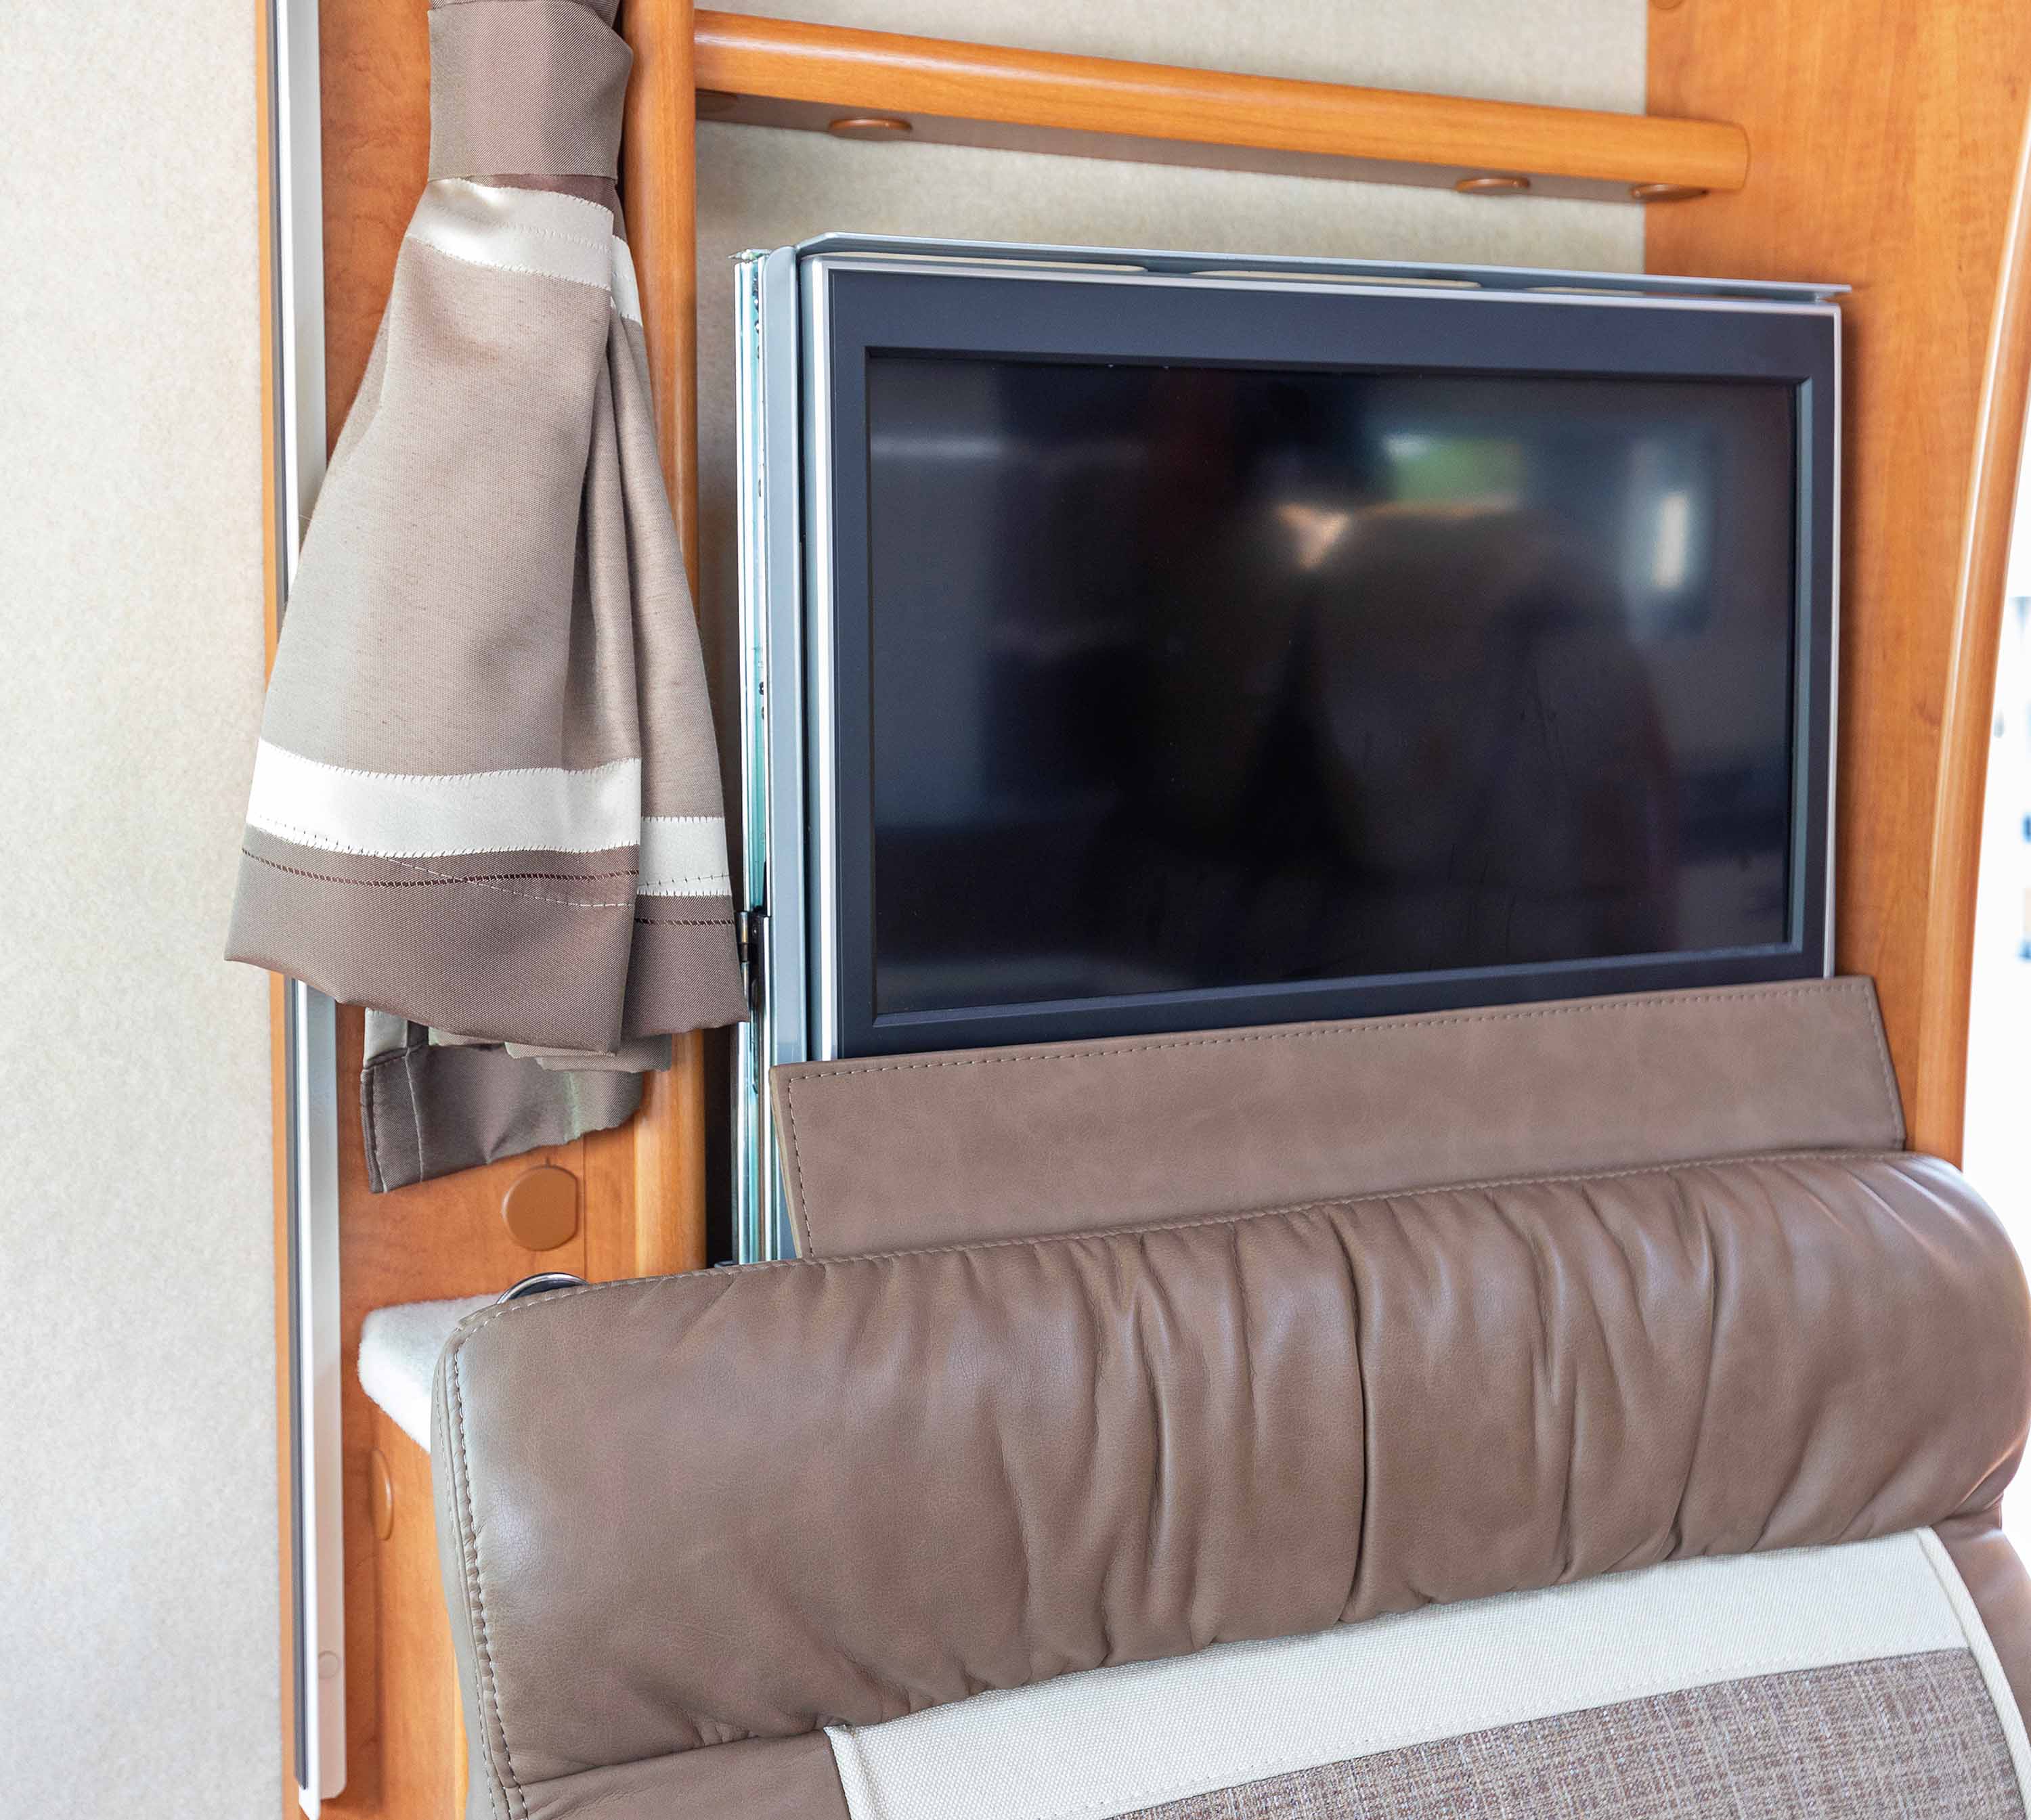 A TV rises out of its hidden position behind a dinette via a televator in an RV.